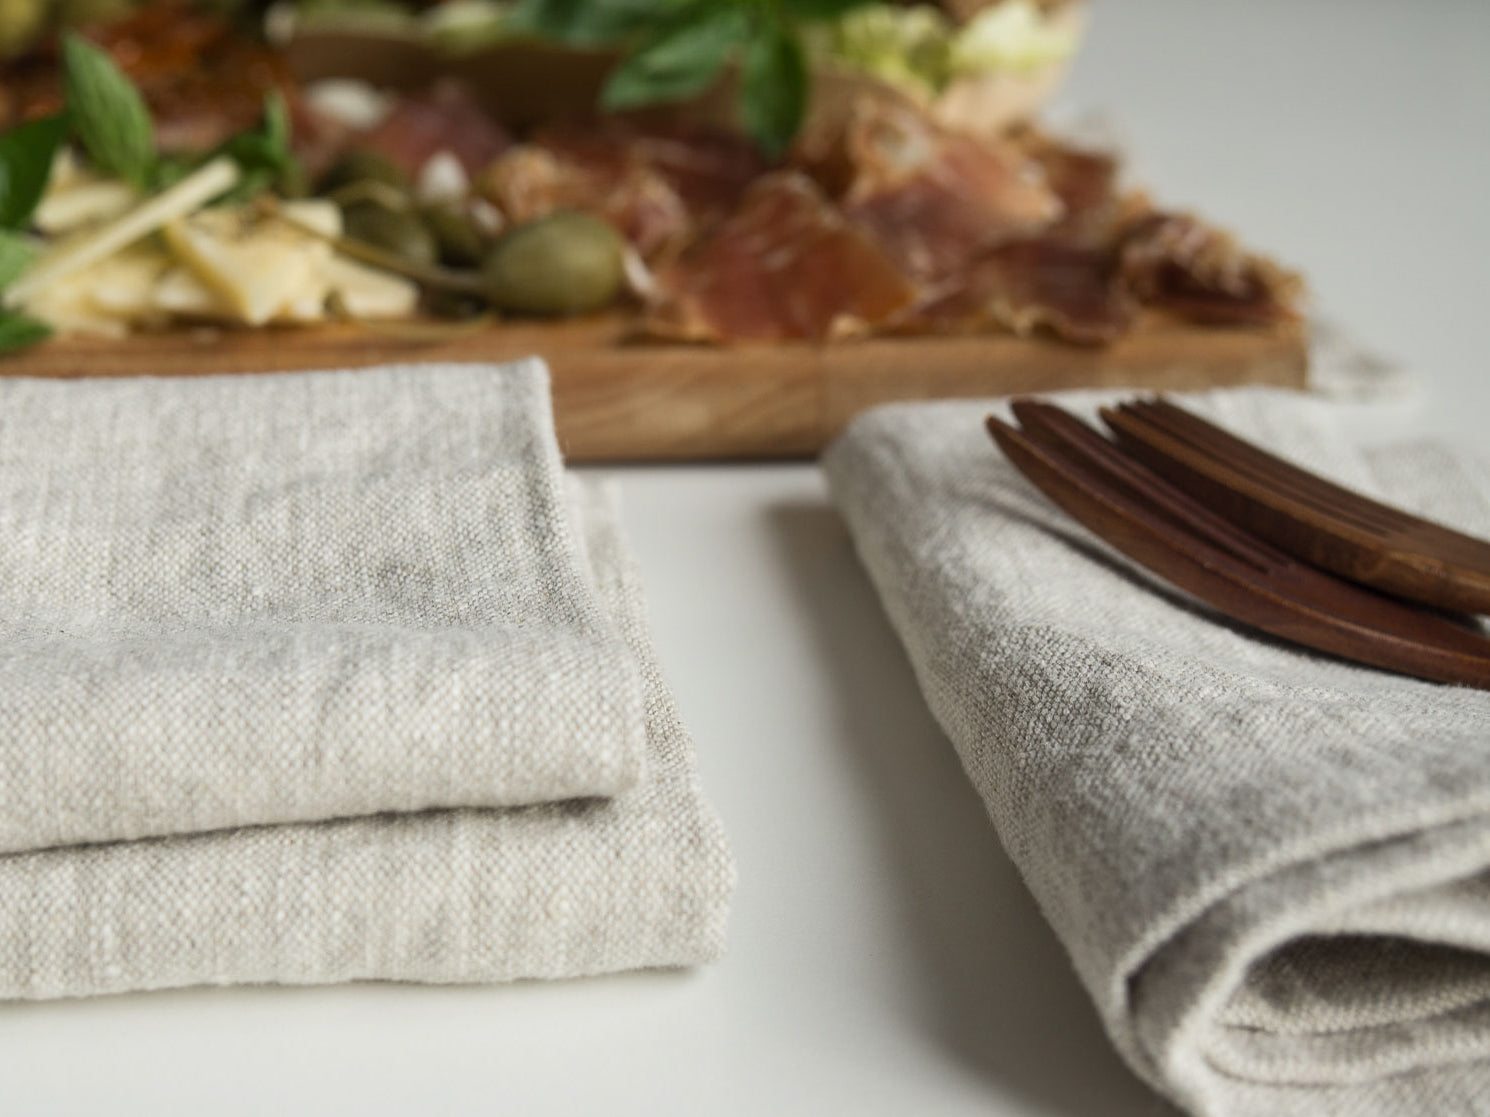 Linen Napkins with served Charcuterie Board